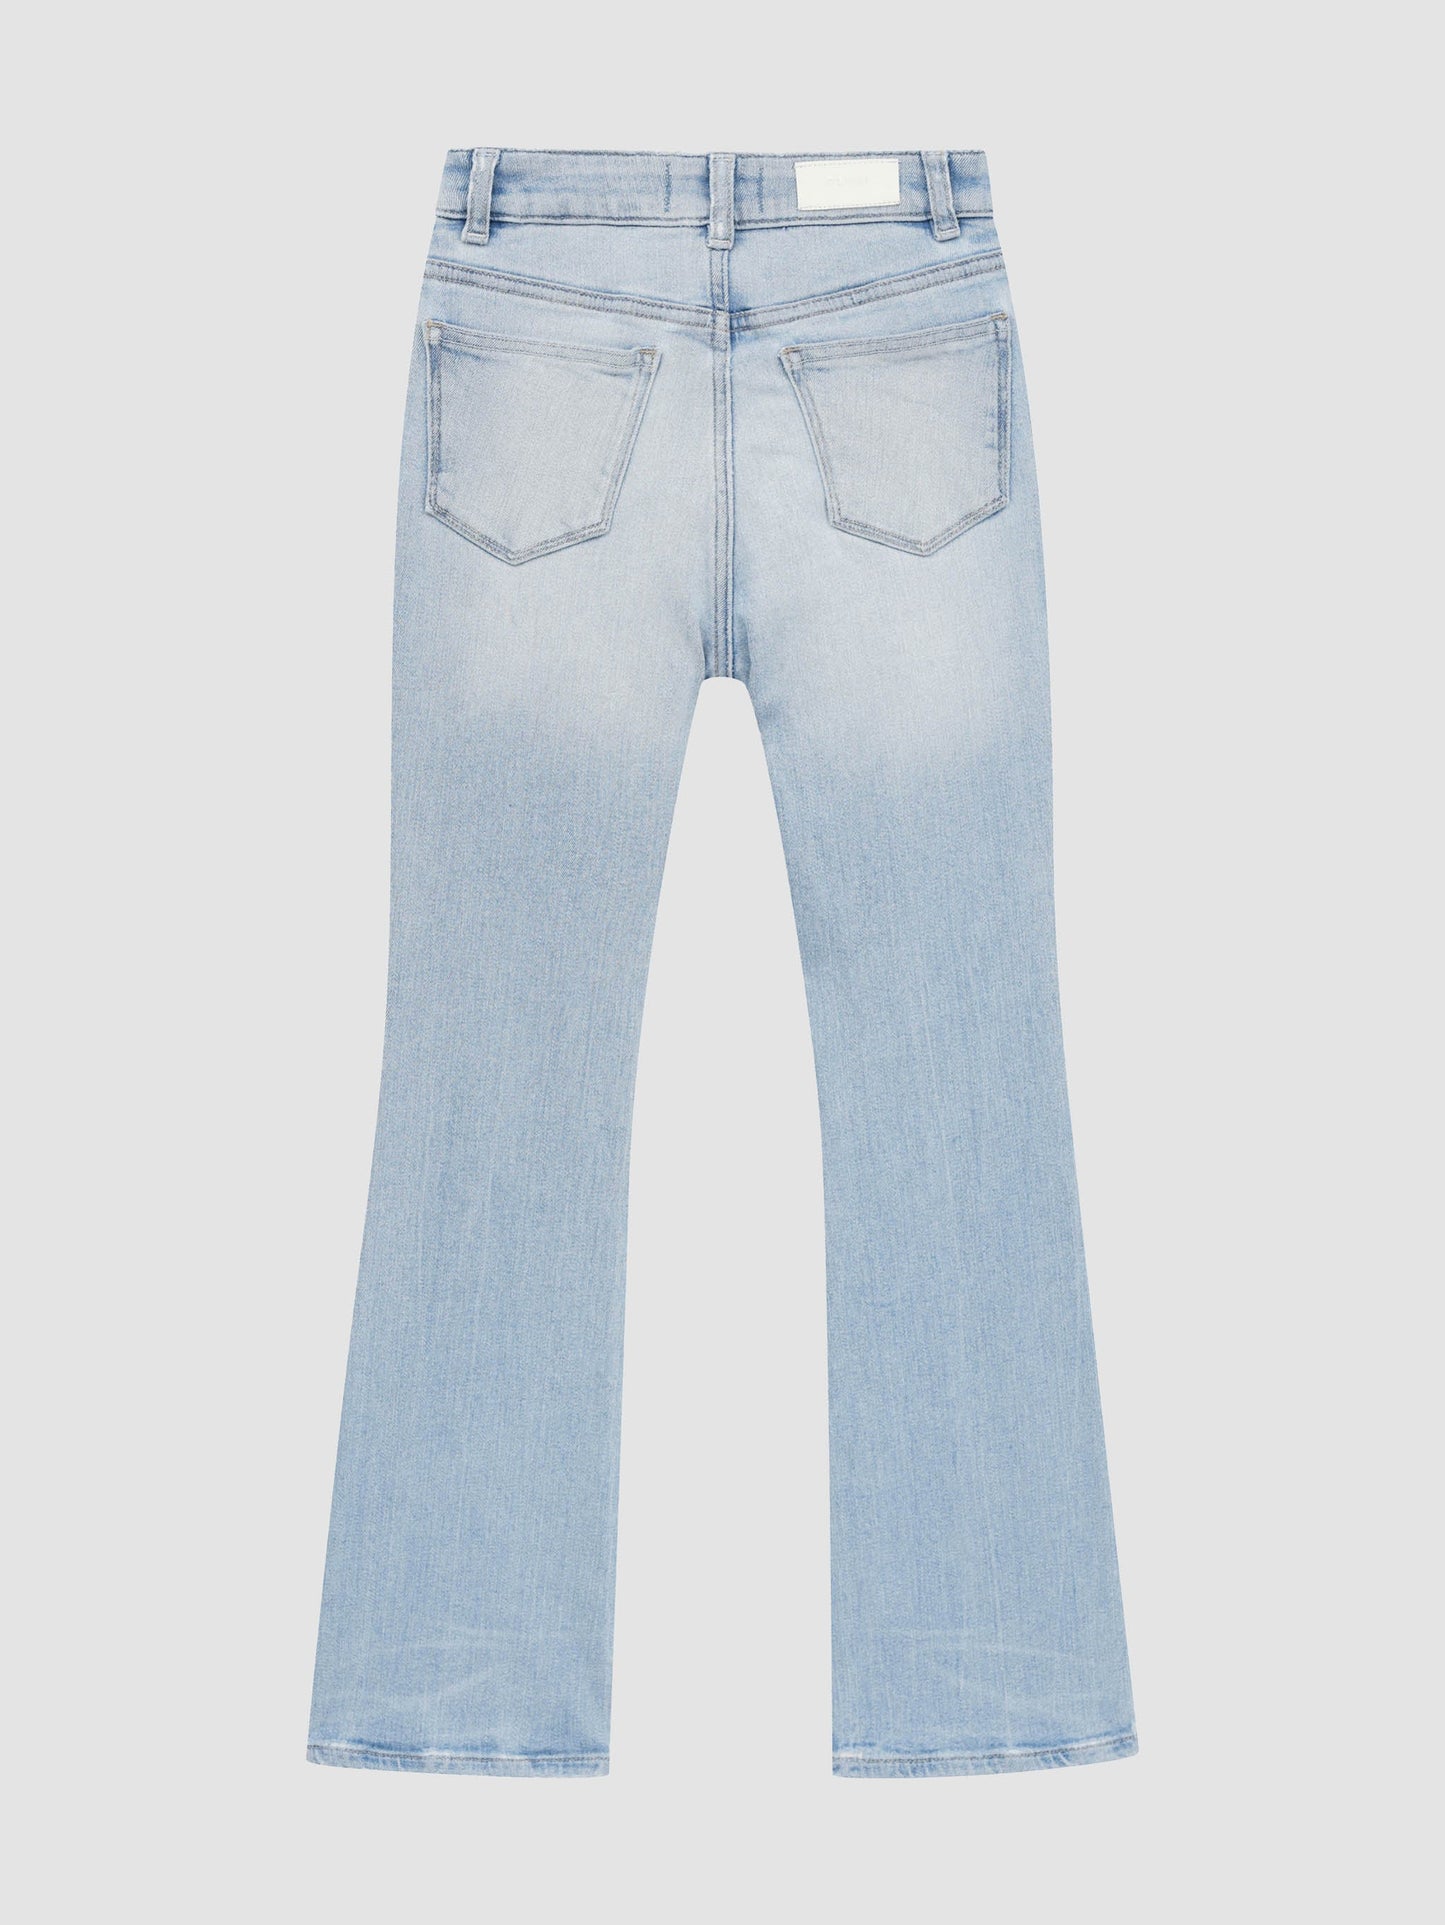 Claire Bootcut Jeans High Rise in Light Denim